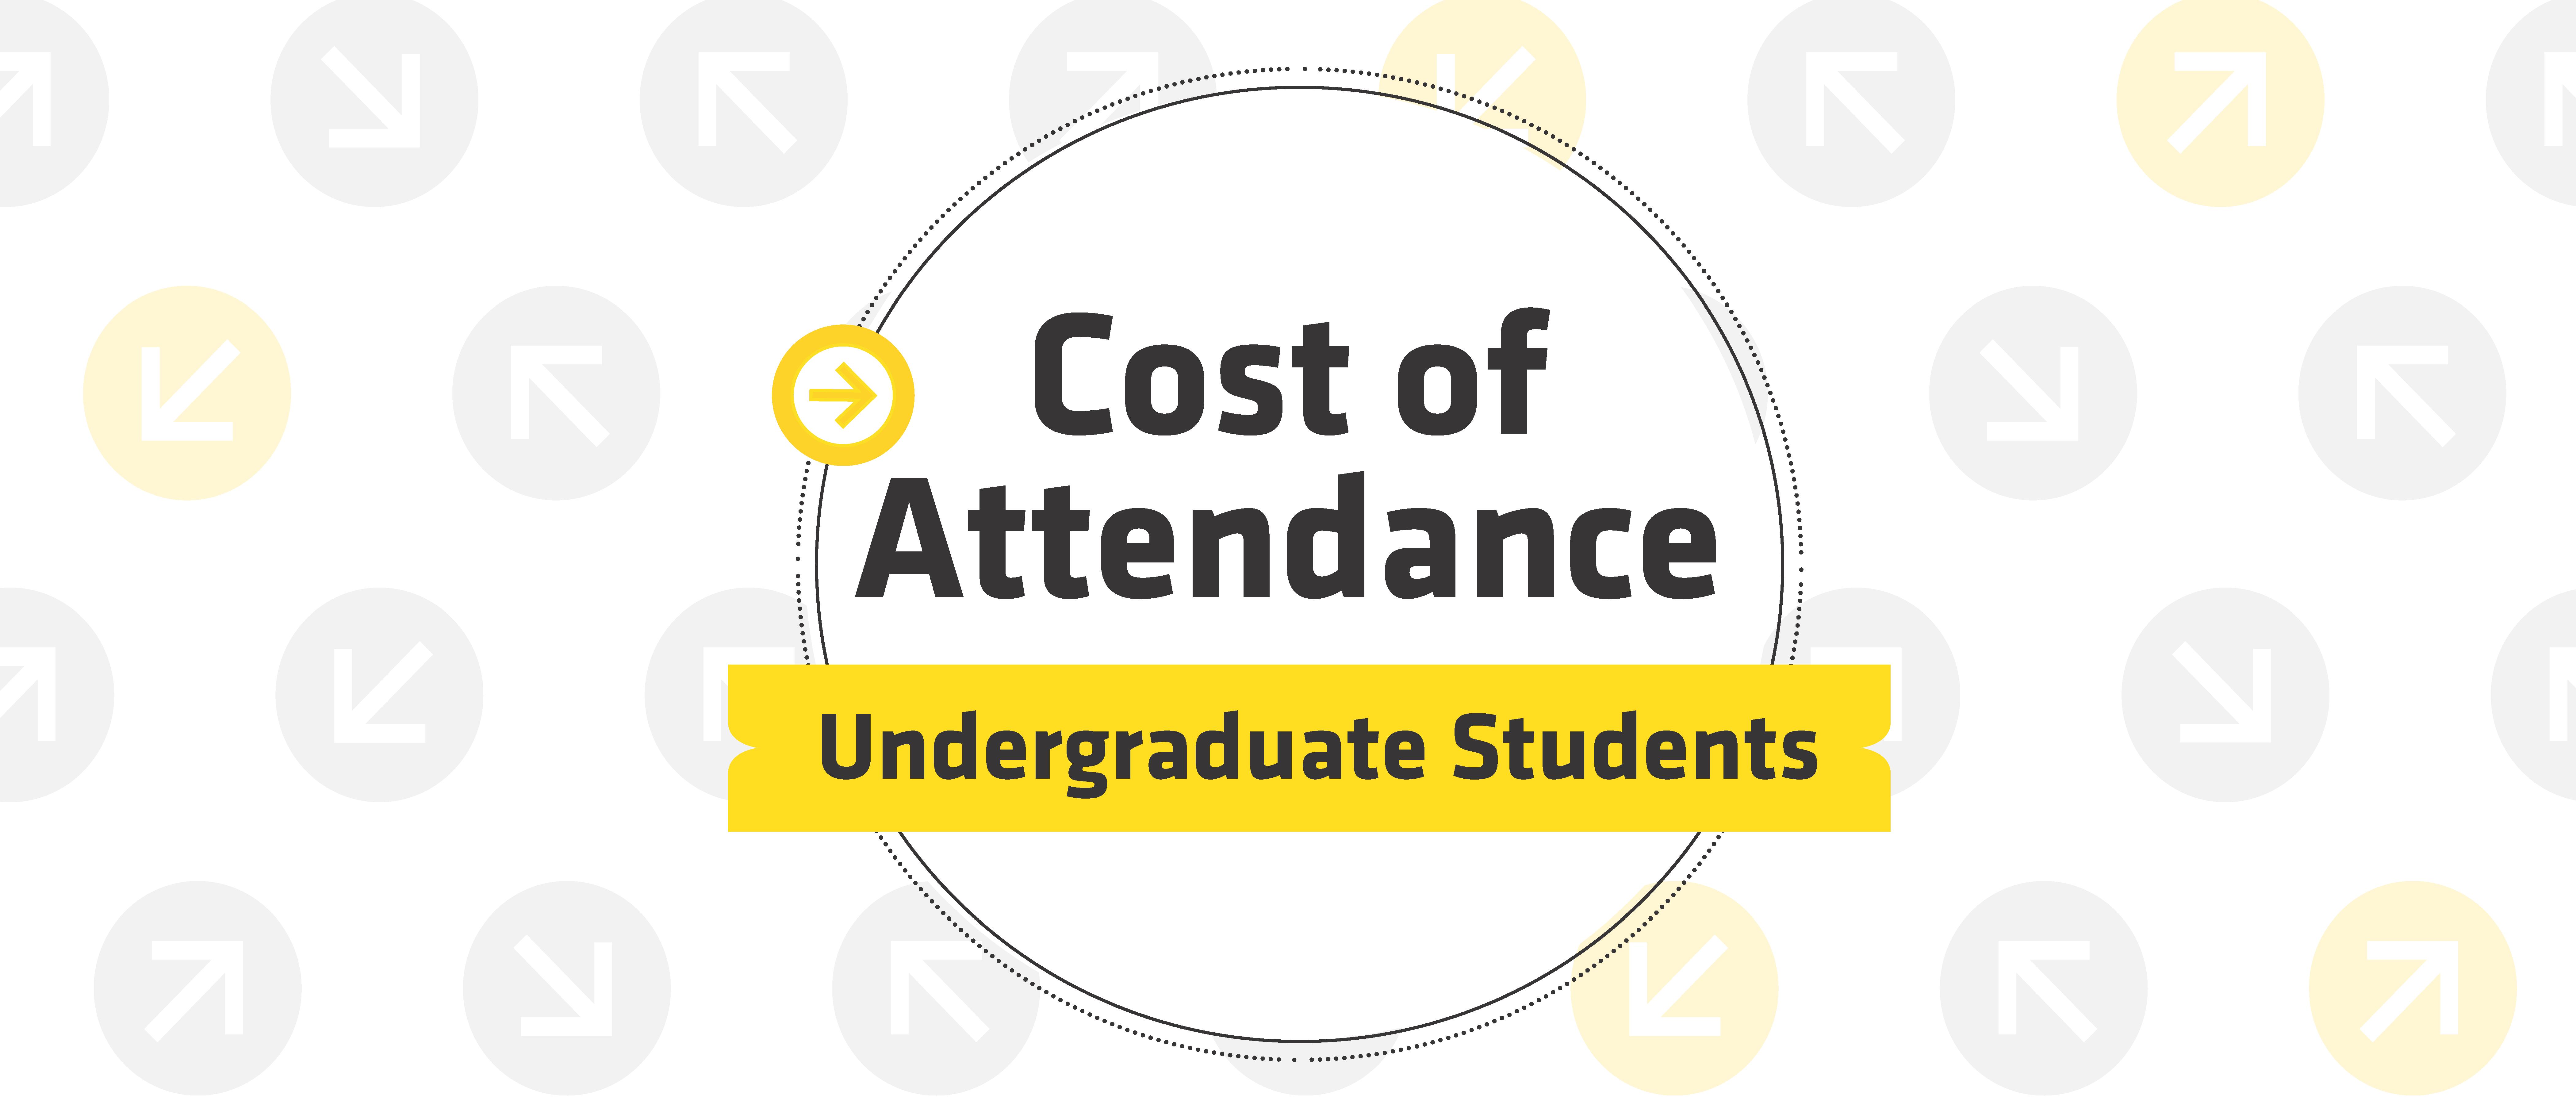 Cost of Attendance Undergraduate with circles and arrows